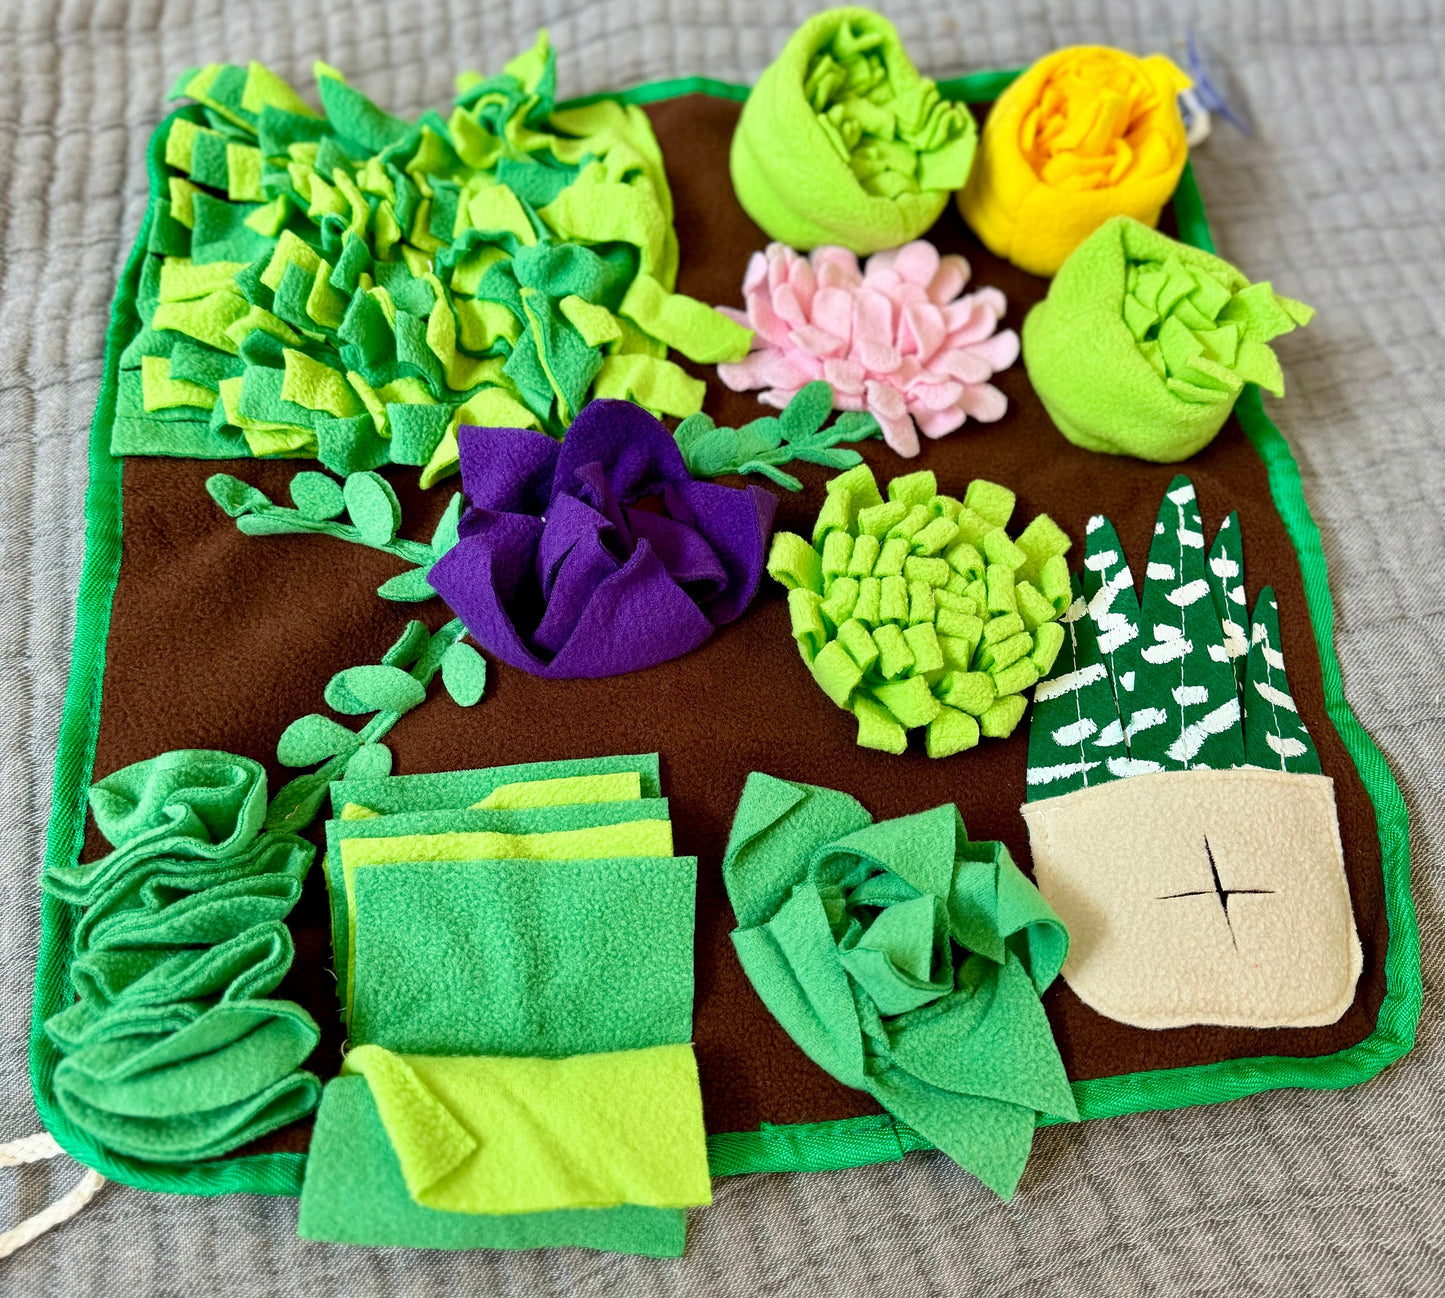 Succulent Forest Snuffle Mat | Foraging toy, boredom busting enrichment for bunnies, hamsters, guinea pigs and other small animals